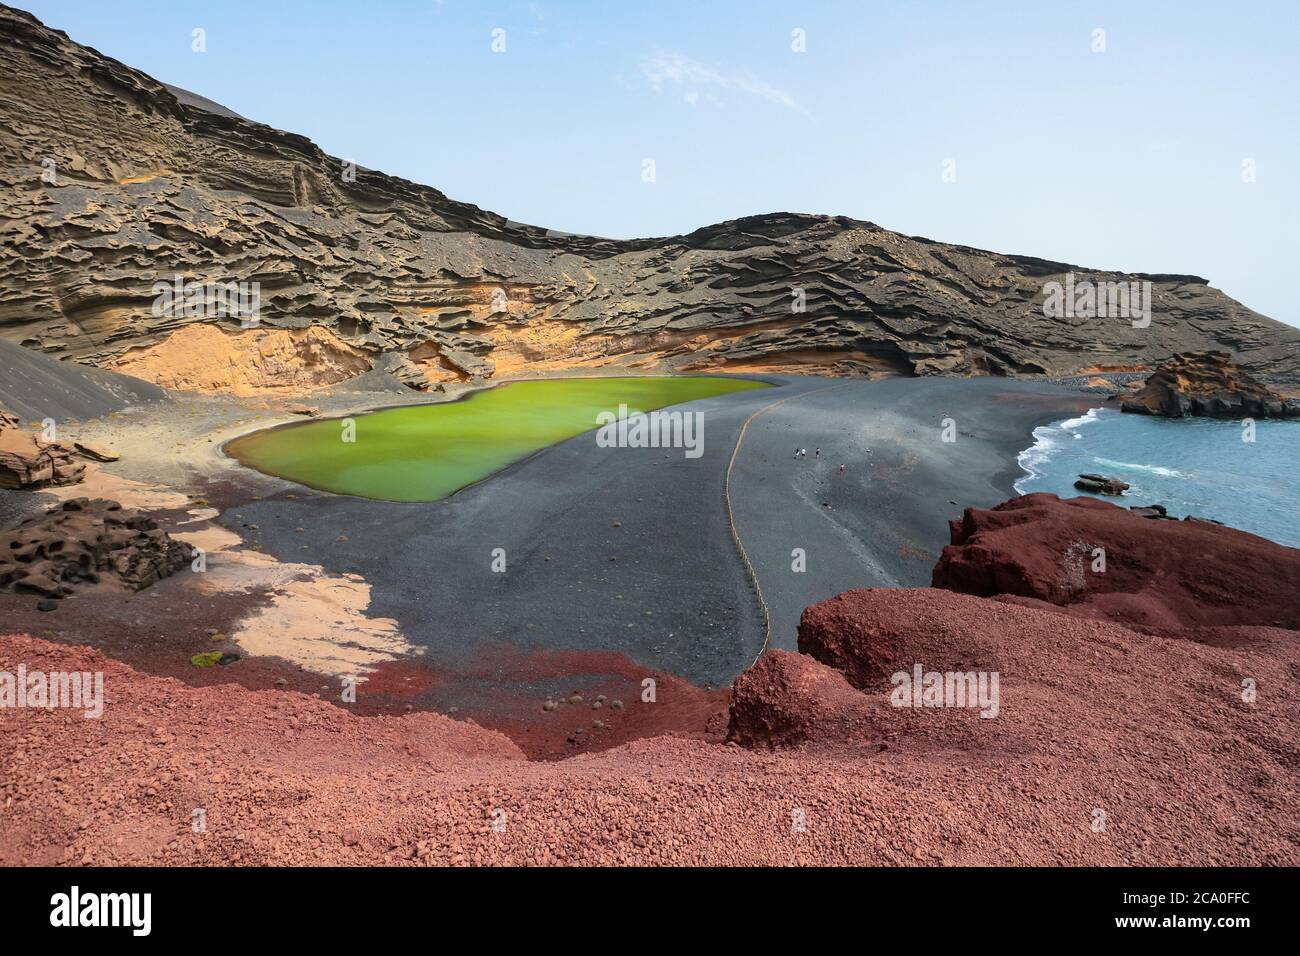 Lago Verde ('Green Lake') in El Golfo, Lanzarote, Canary Islands, Spain. Colorful landscape with black sand beach, dark volcanic rocks and red earth. Stock Photo